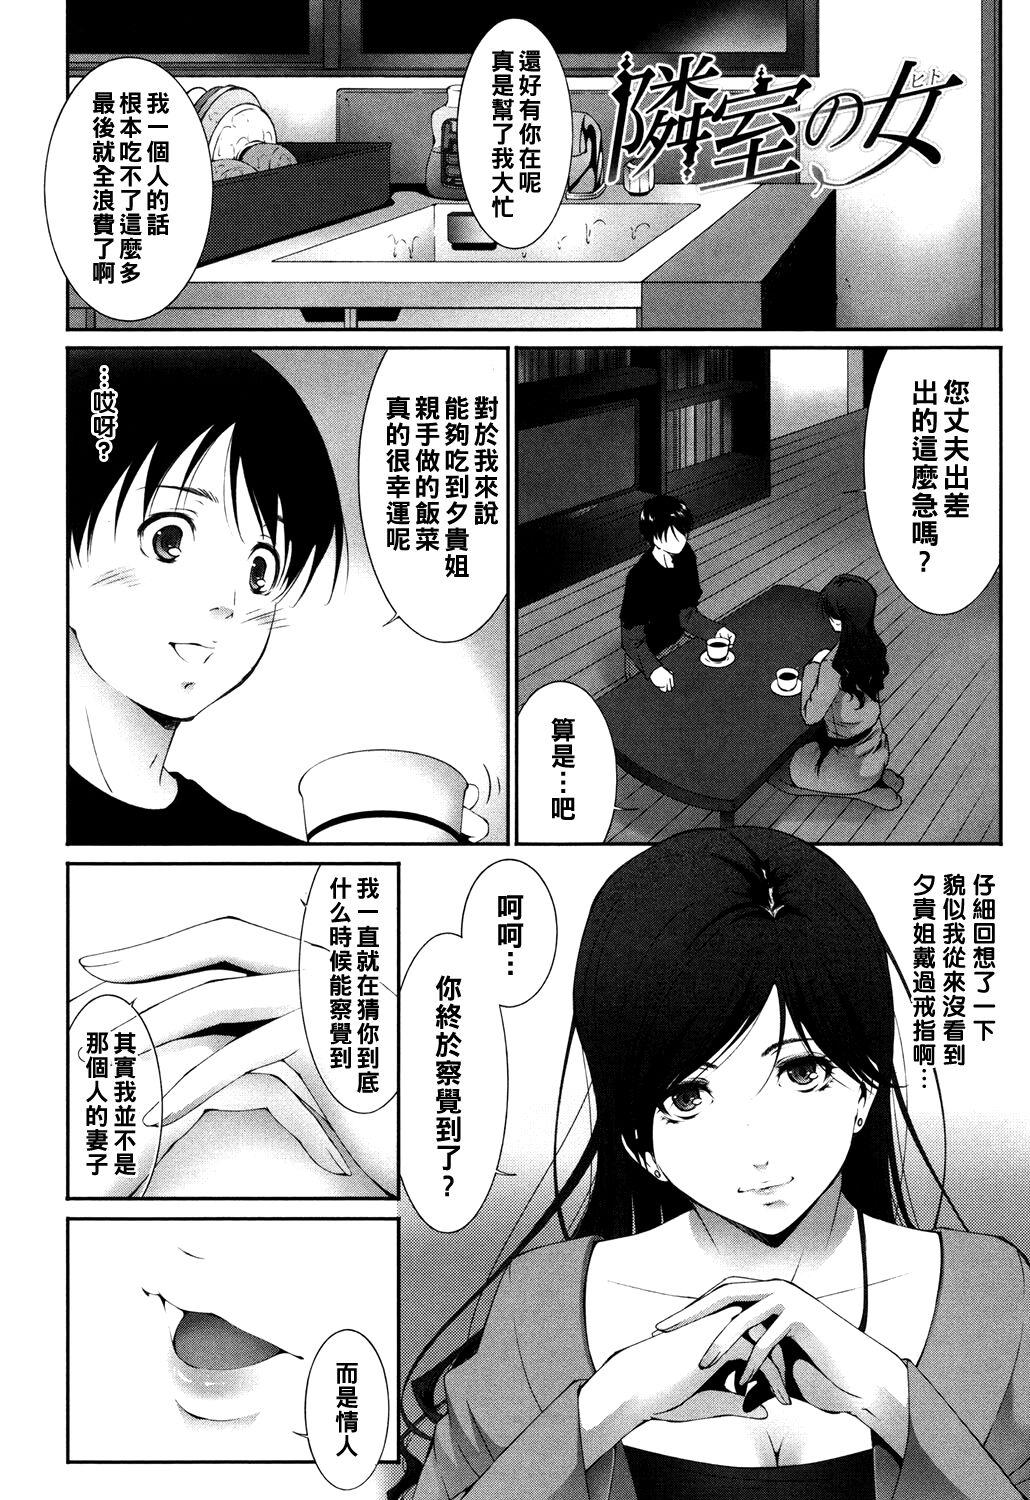 Relax 隣室の女（Chinese） Chilena - Page 2